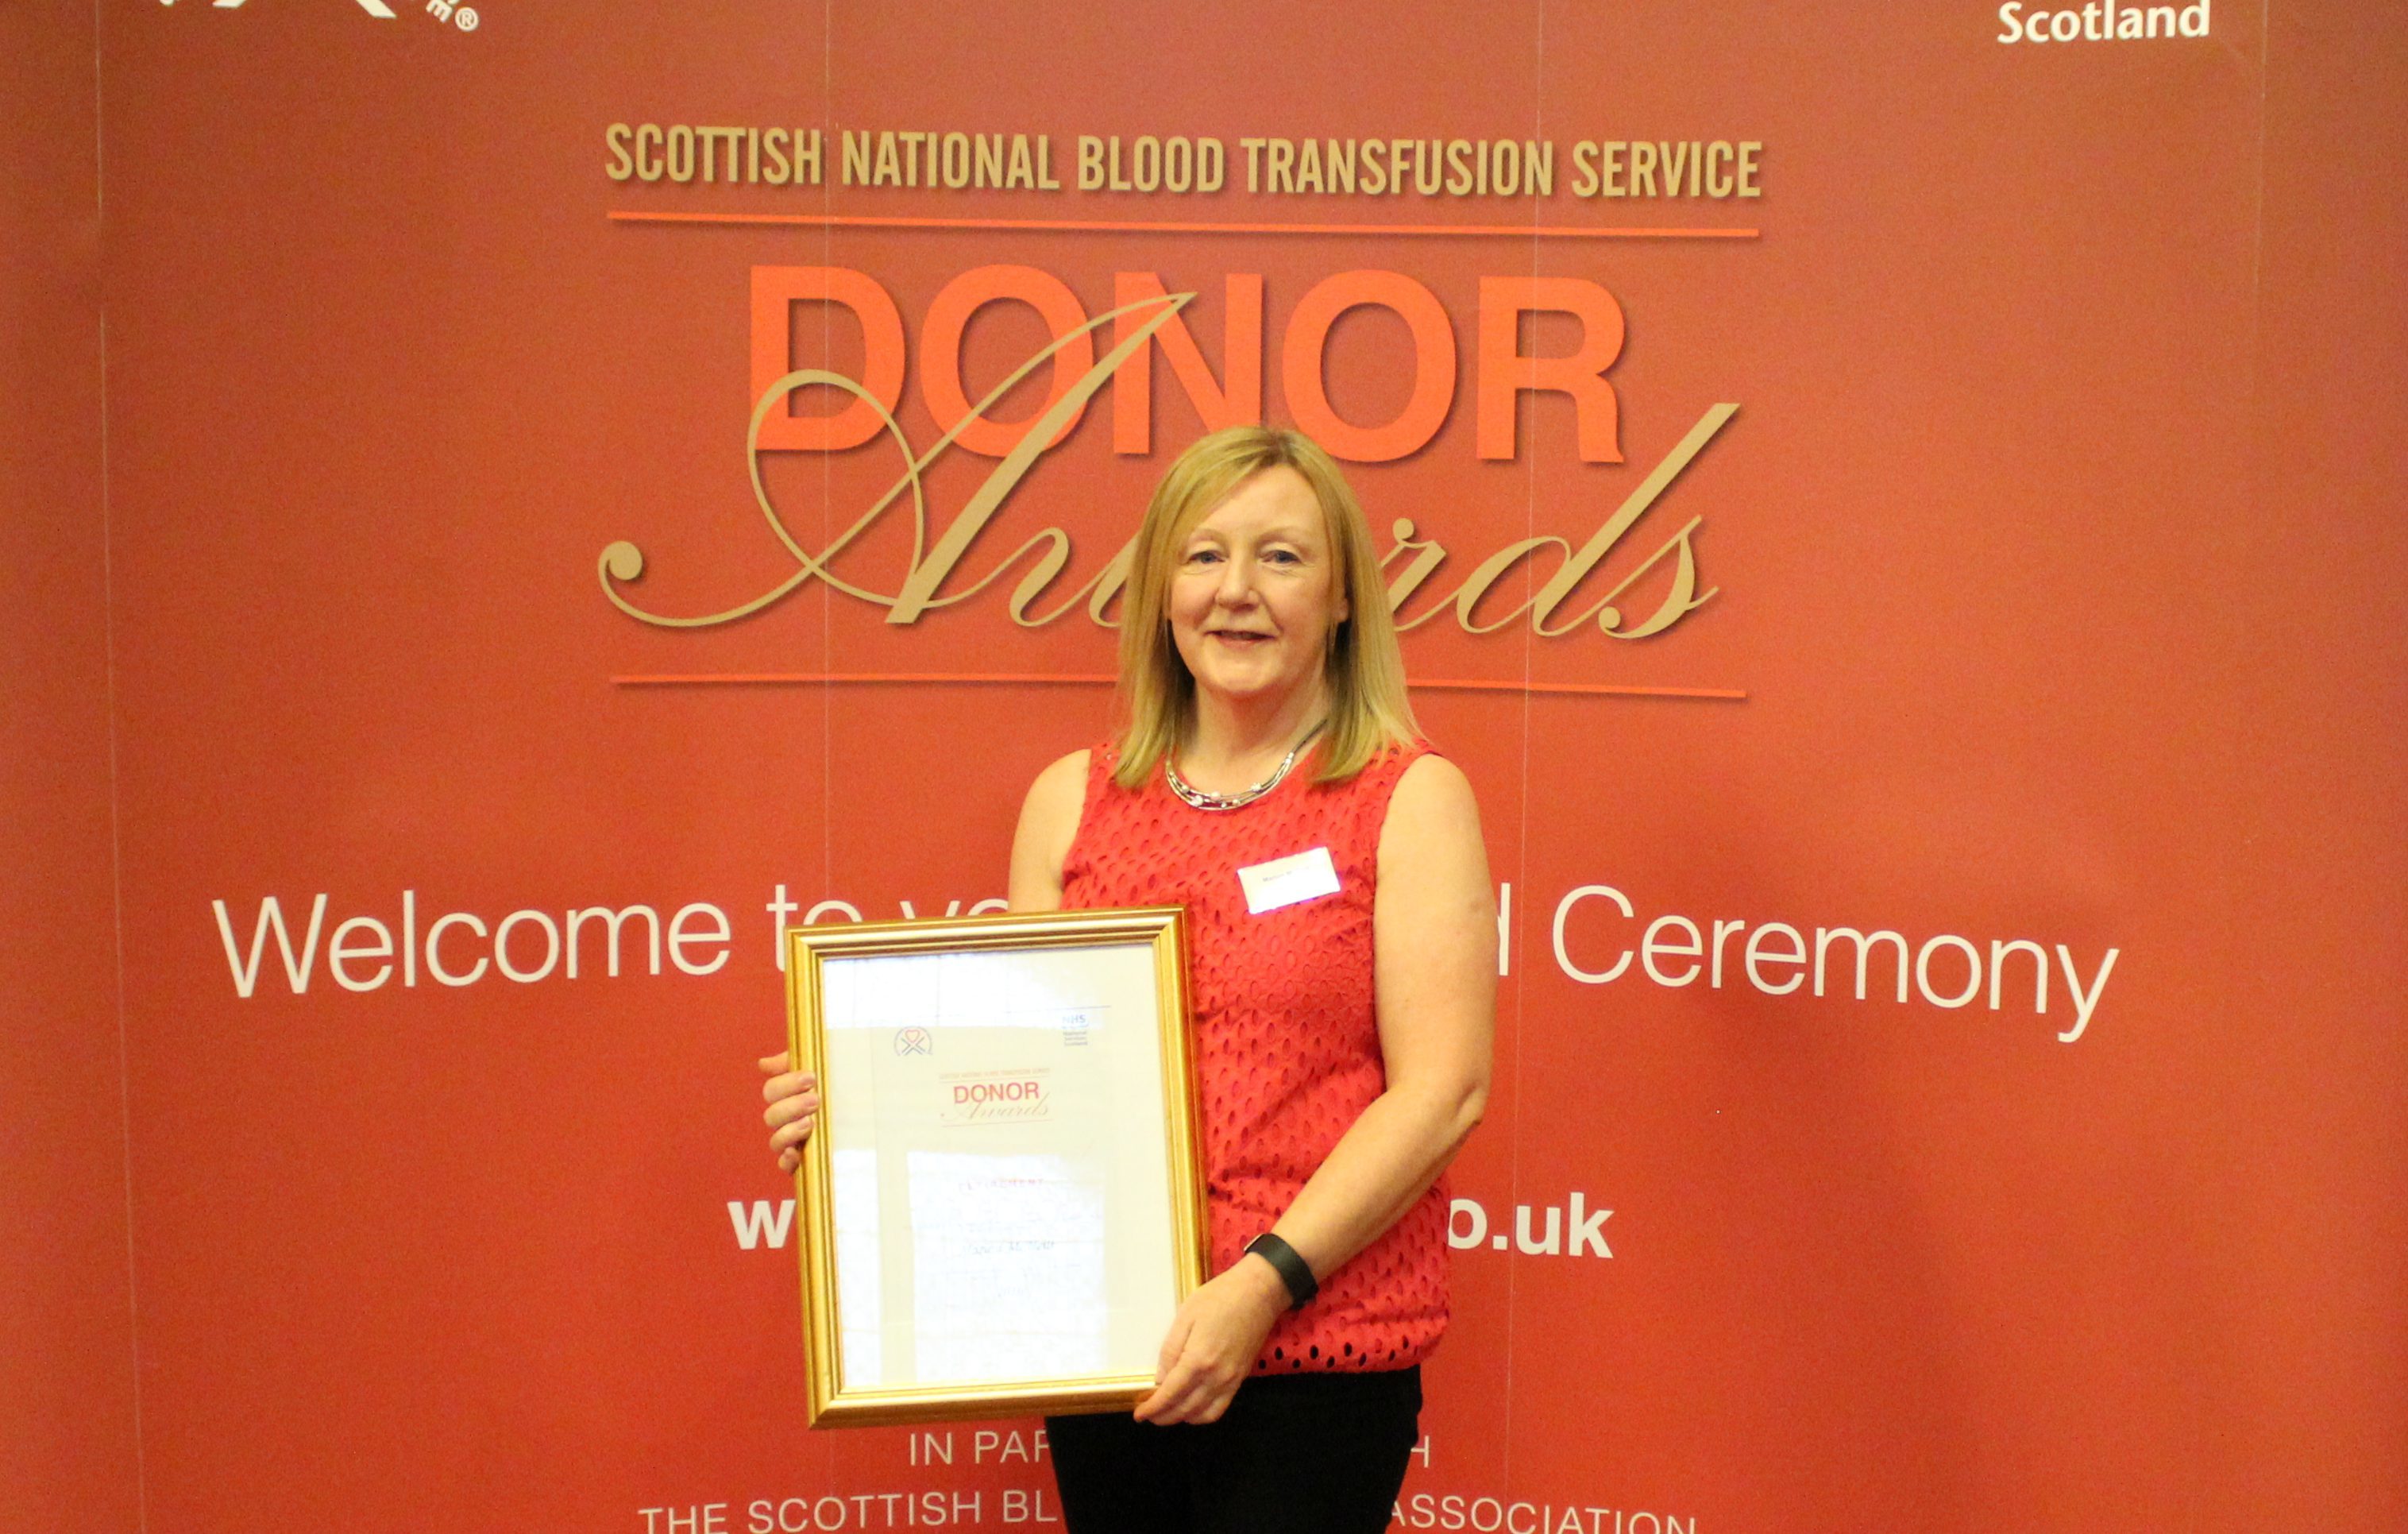 Marion was awarded with her certificate in Glasgow after giving 100 pints of blood